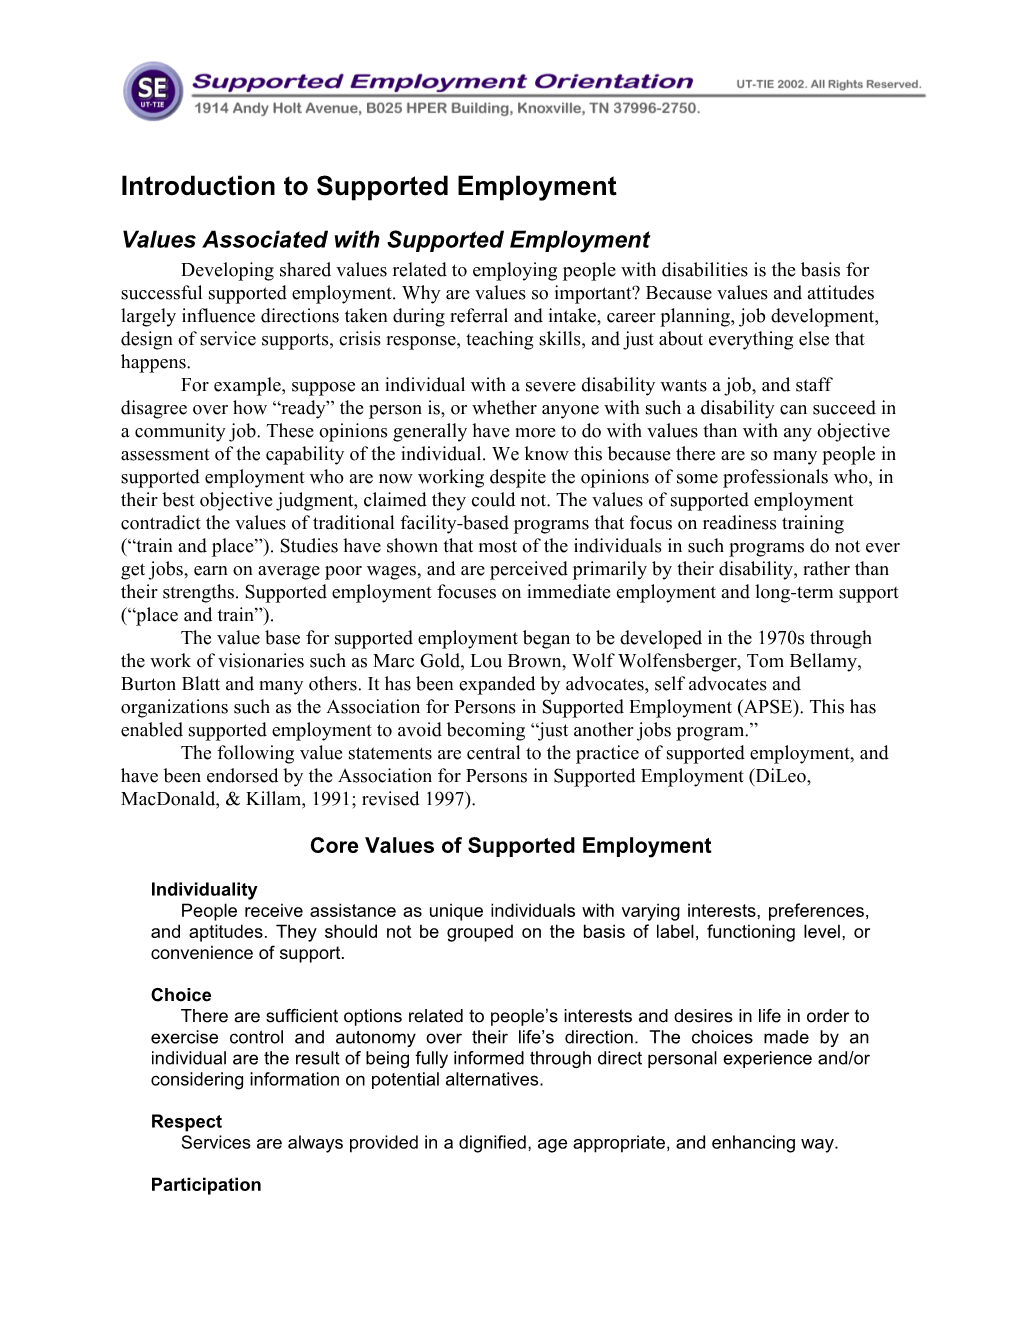 Values Associated with Supported Employment